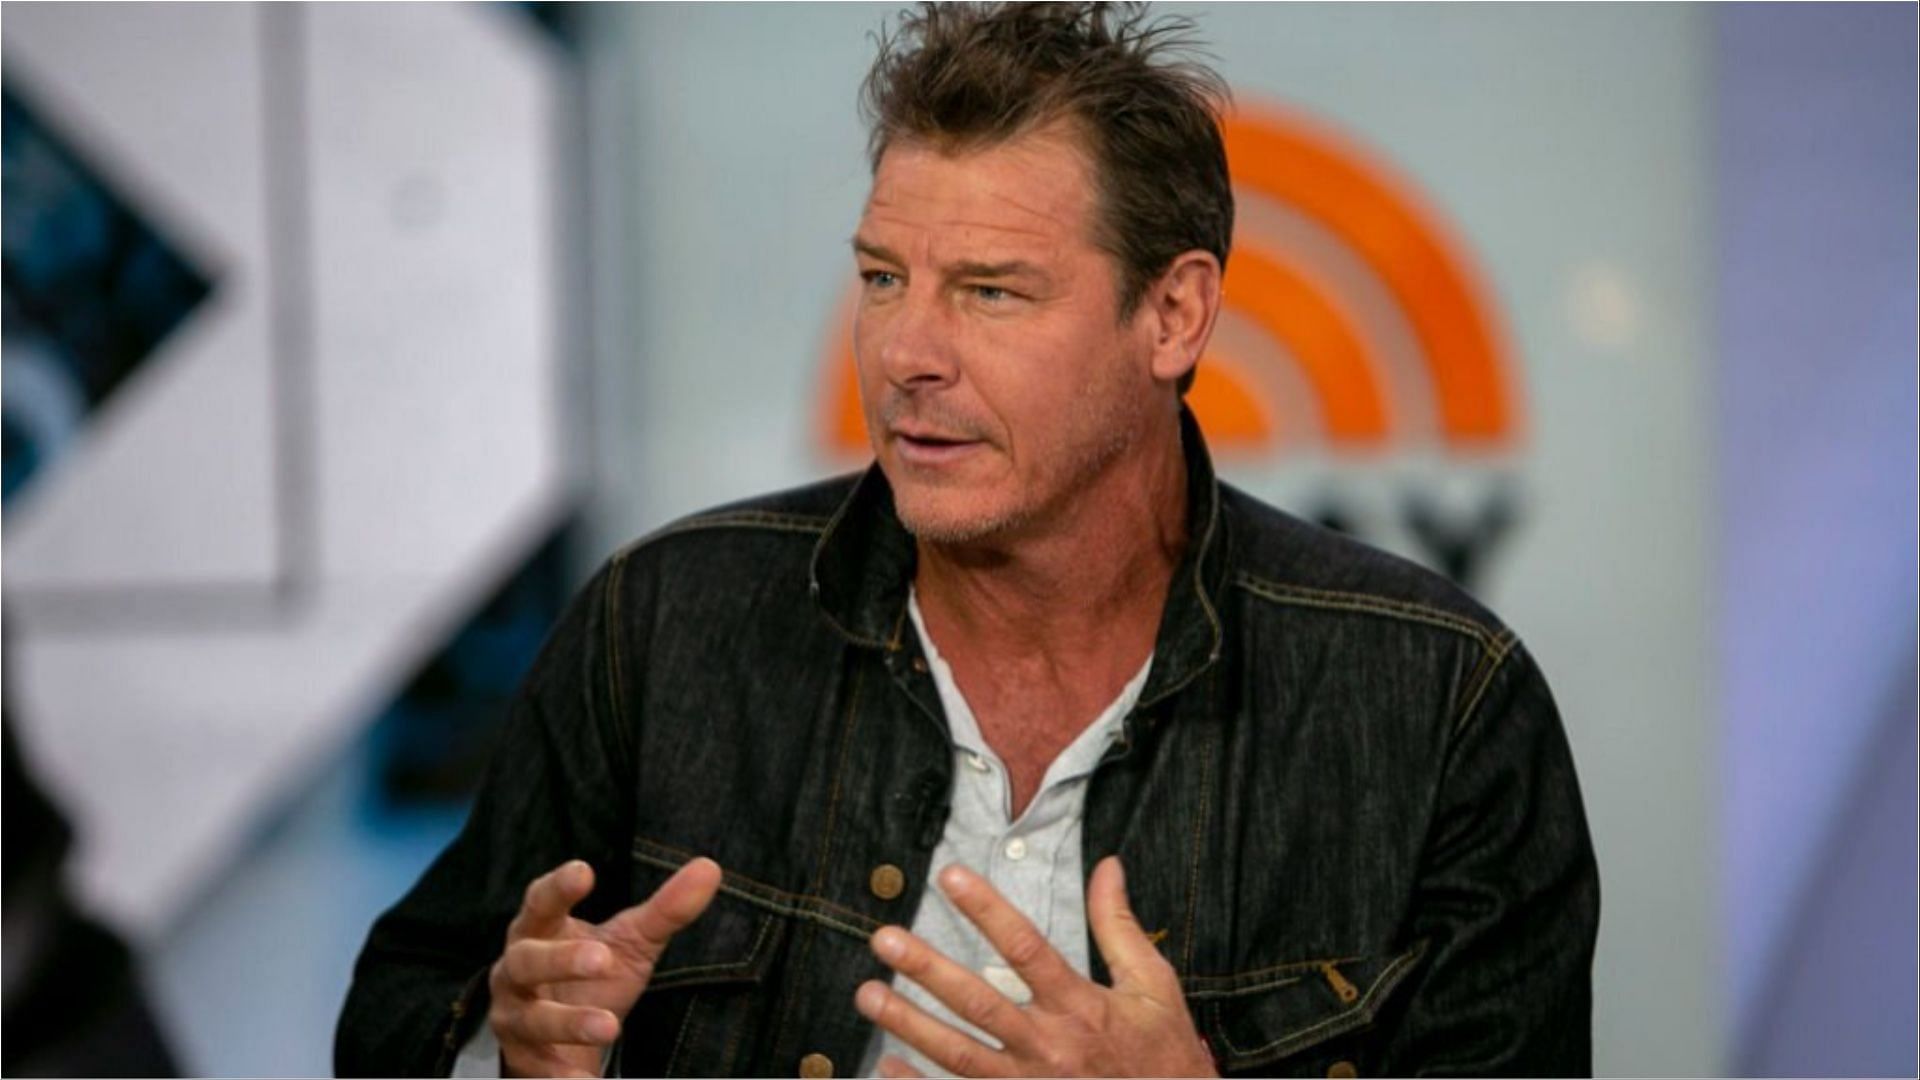 Ty Pennington battled with ADHD since the age of 17 (Image via Zach Pagano/Getty Images)